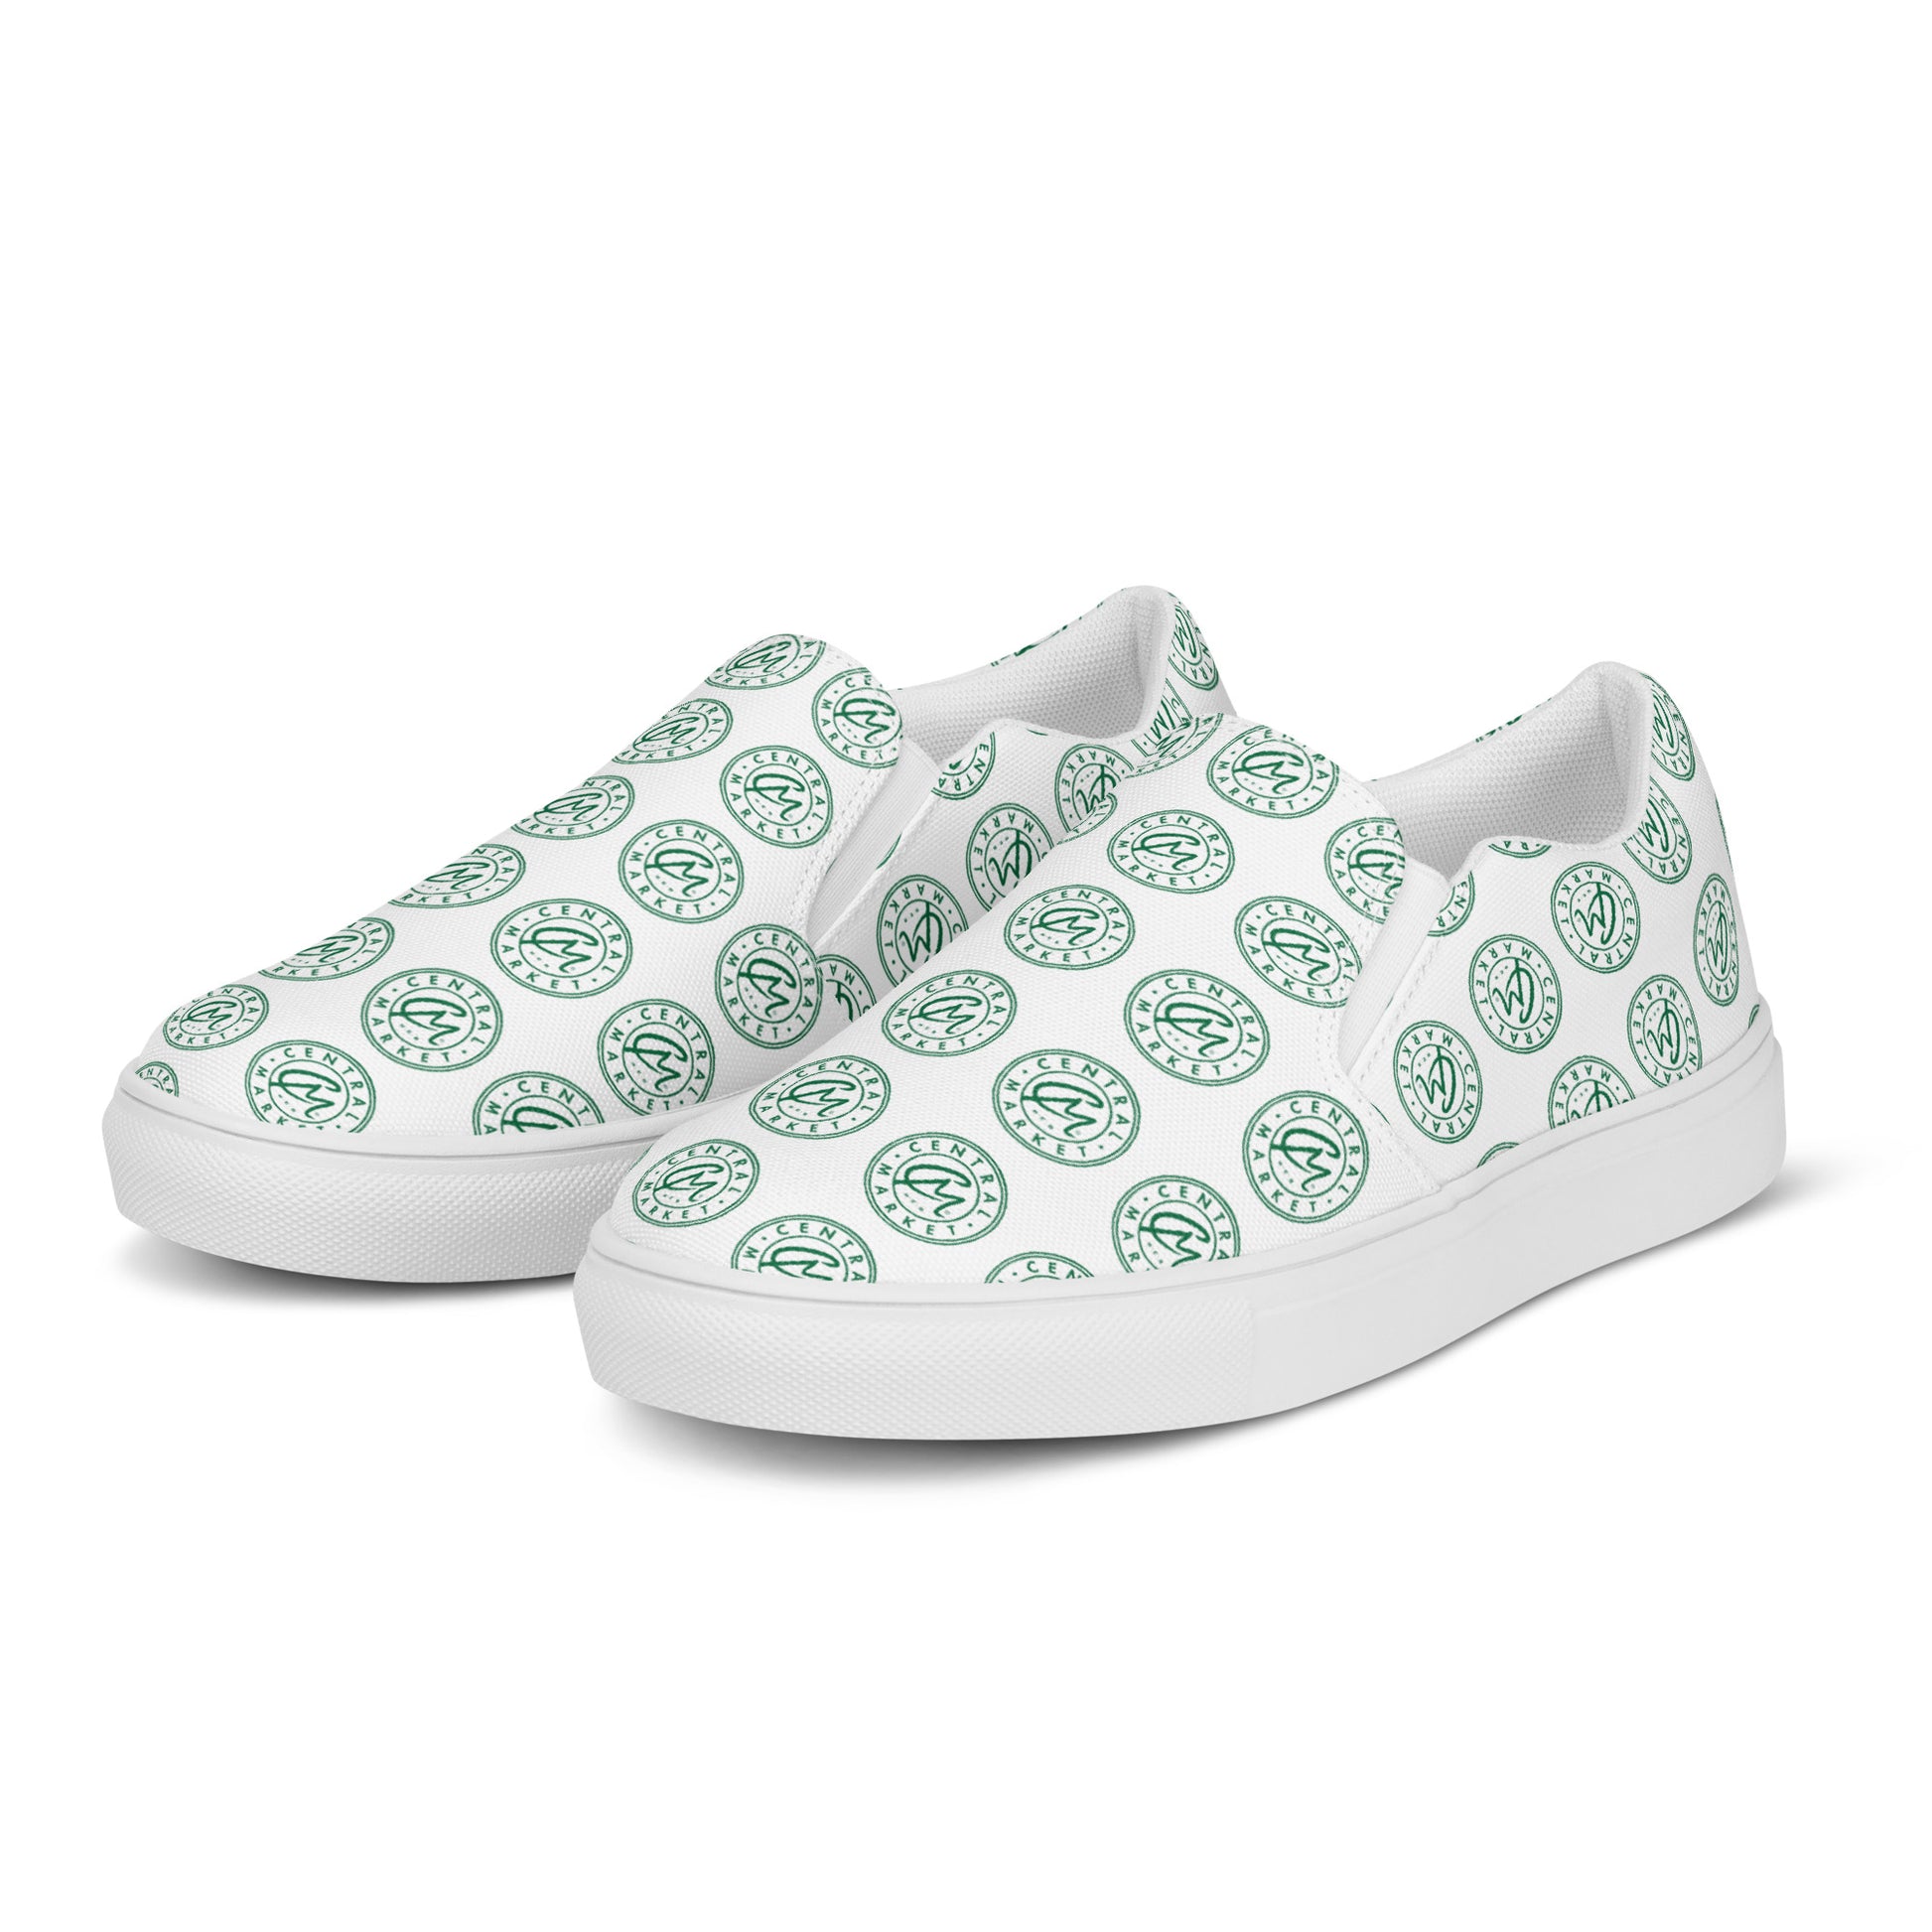 Central Market Women’s slip-on canvas shoes CedarHill Country Market